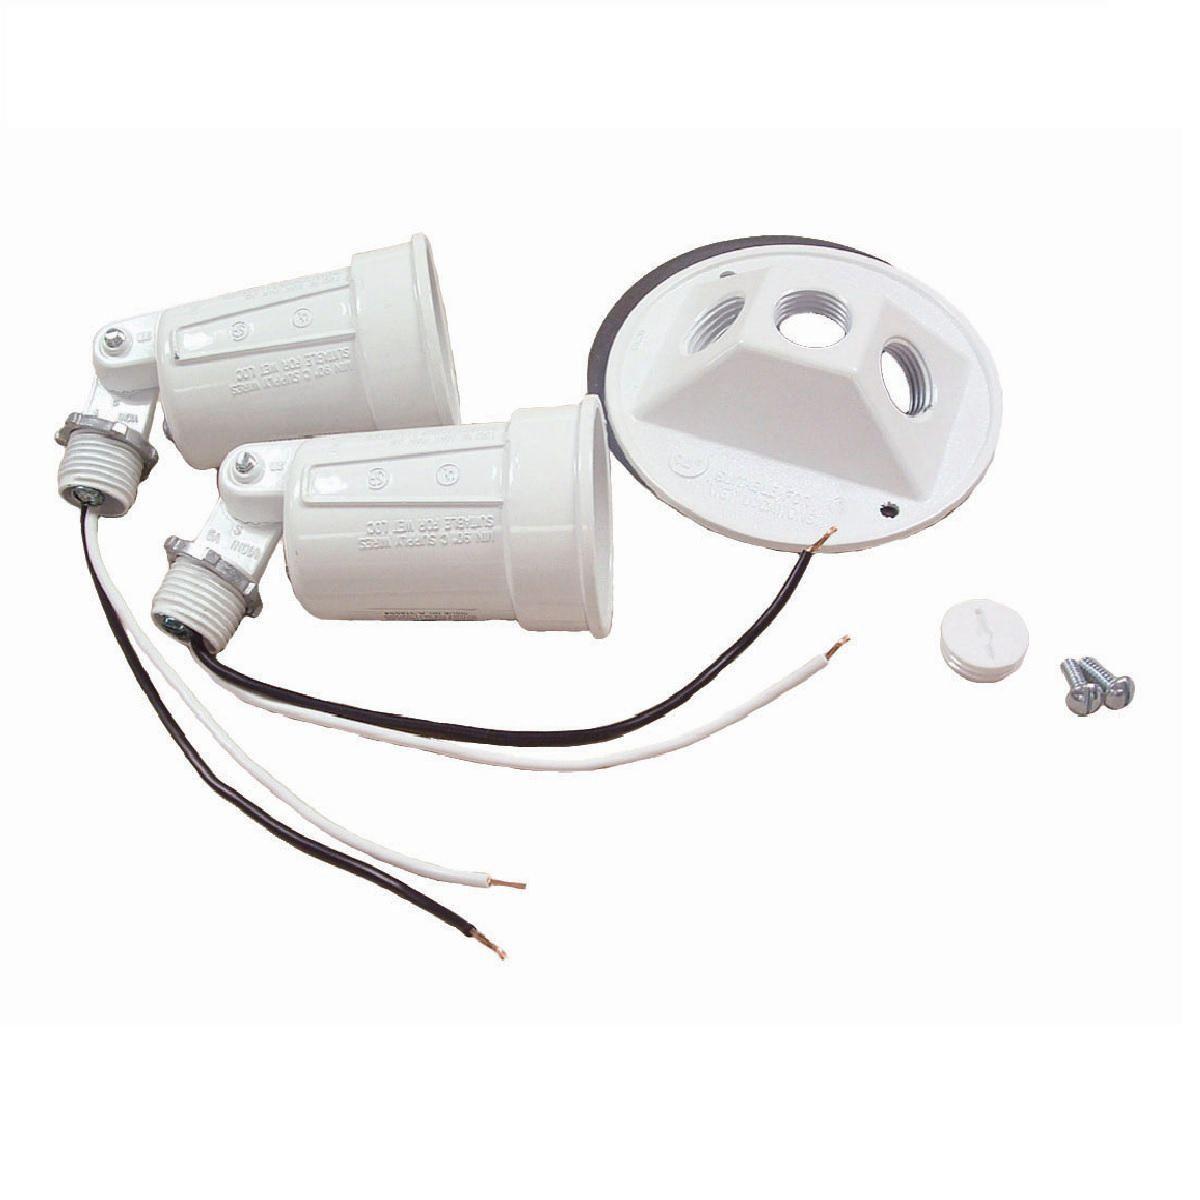 Hubbell 5625-6 4 in. Round Weatherproof Combination Cover for 75-150W Par 38 Lamps, Includes 2 Lampholders, Gasket, and Hardware, White, Carded  ; Rugged die cast constructions. ; State-of-the-art powder coat finish provides maximum weatherability and scratch resistance